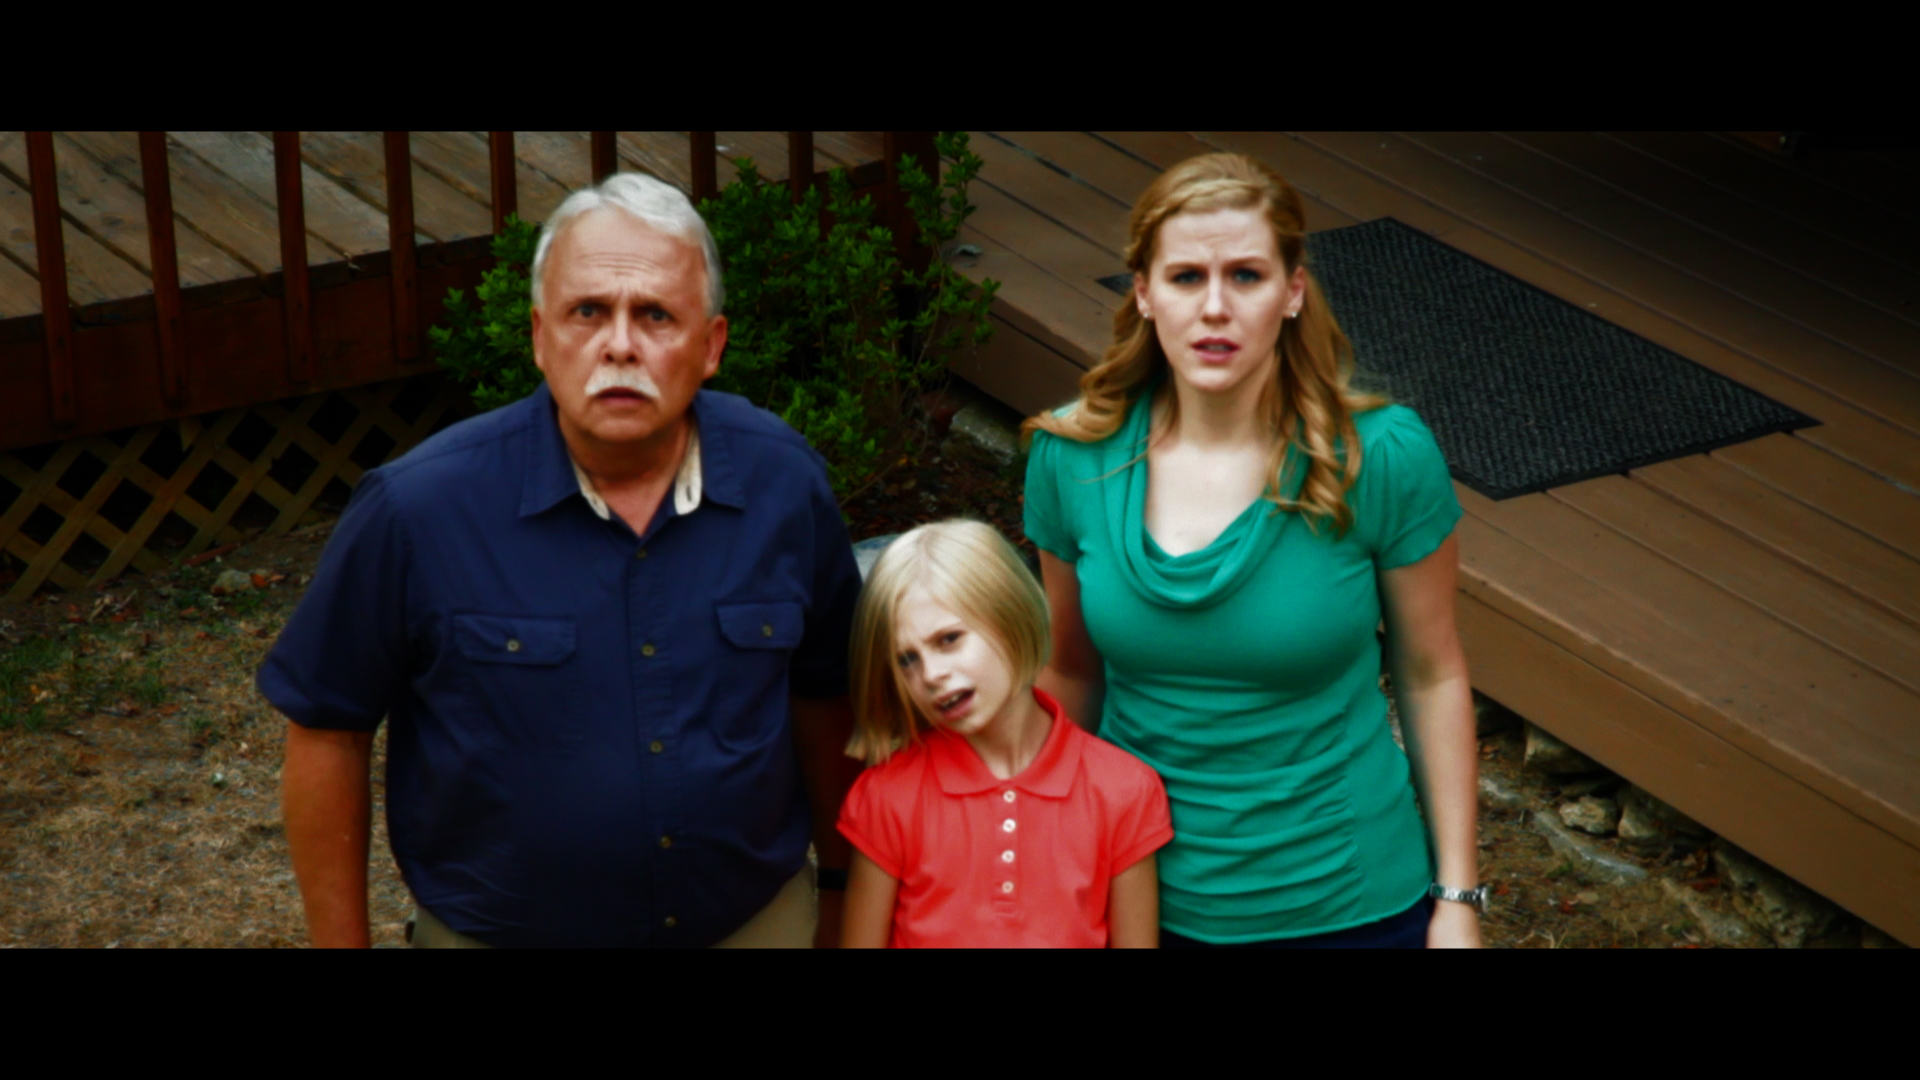 THE WATCHERS: REVELATION production still. Dave Gaylor, Carissa Dallis, and Kaitlin Lory.